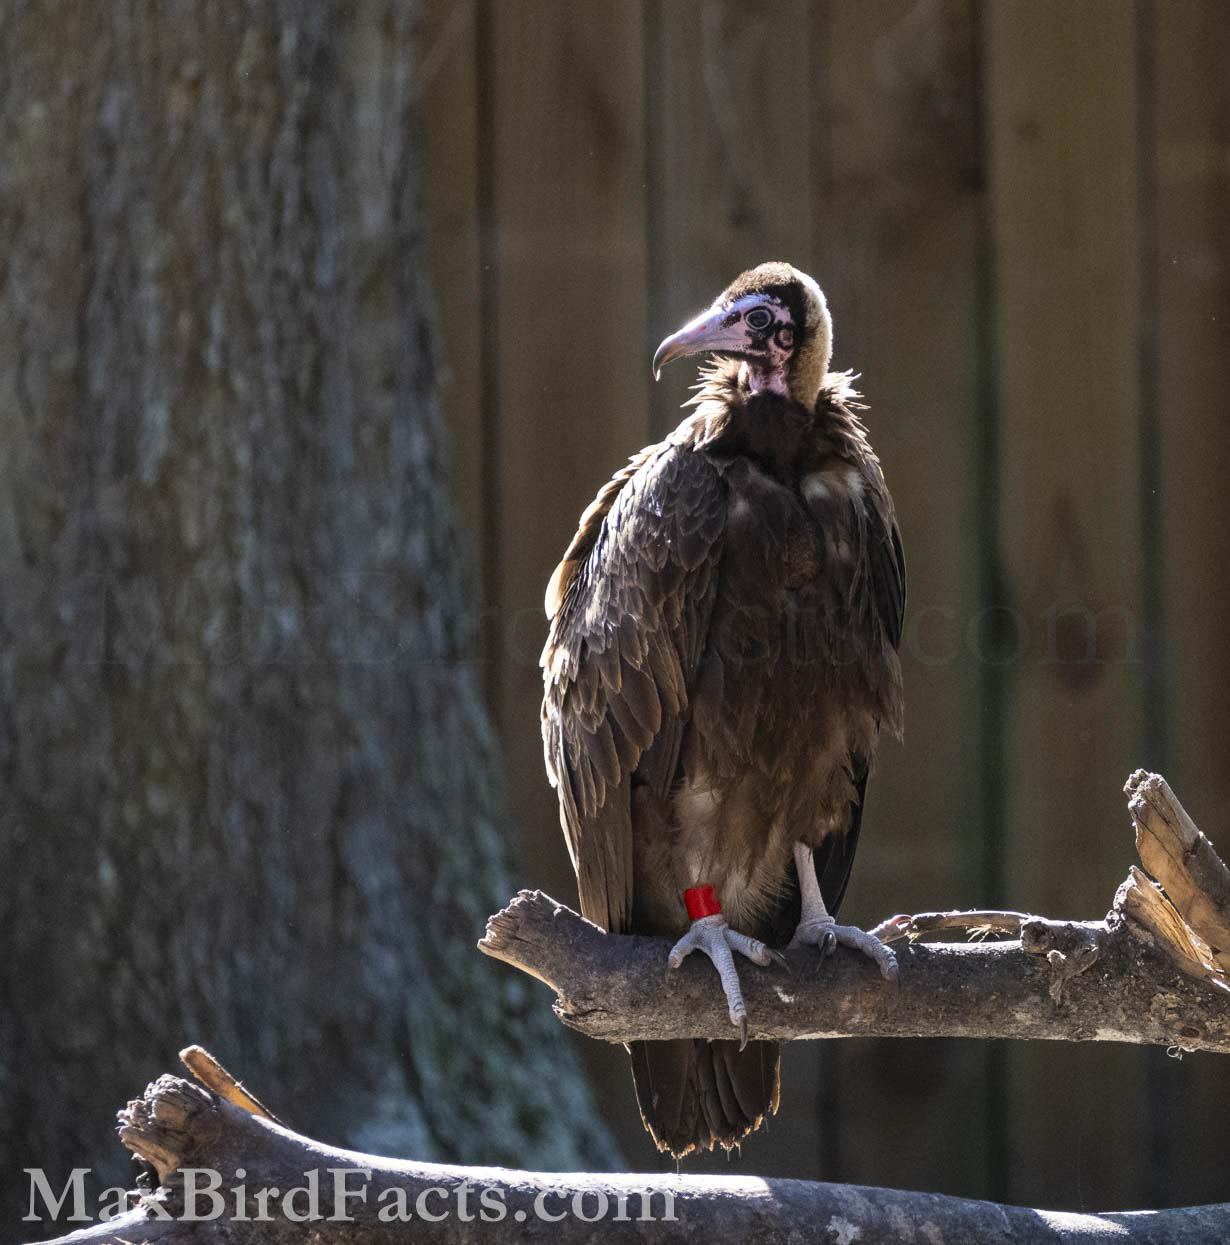 This Hooded Vulture has a partially feathered head, likely to help insulate it a little easier. These feathers are the root of their common name since they appear to form a “hood” on the bird’s head. (St. Augustine, FL. 2022)
Vulture_Lifespan_hooded_vulture